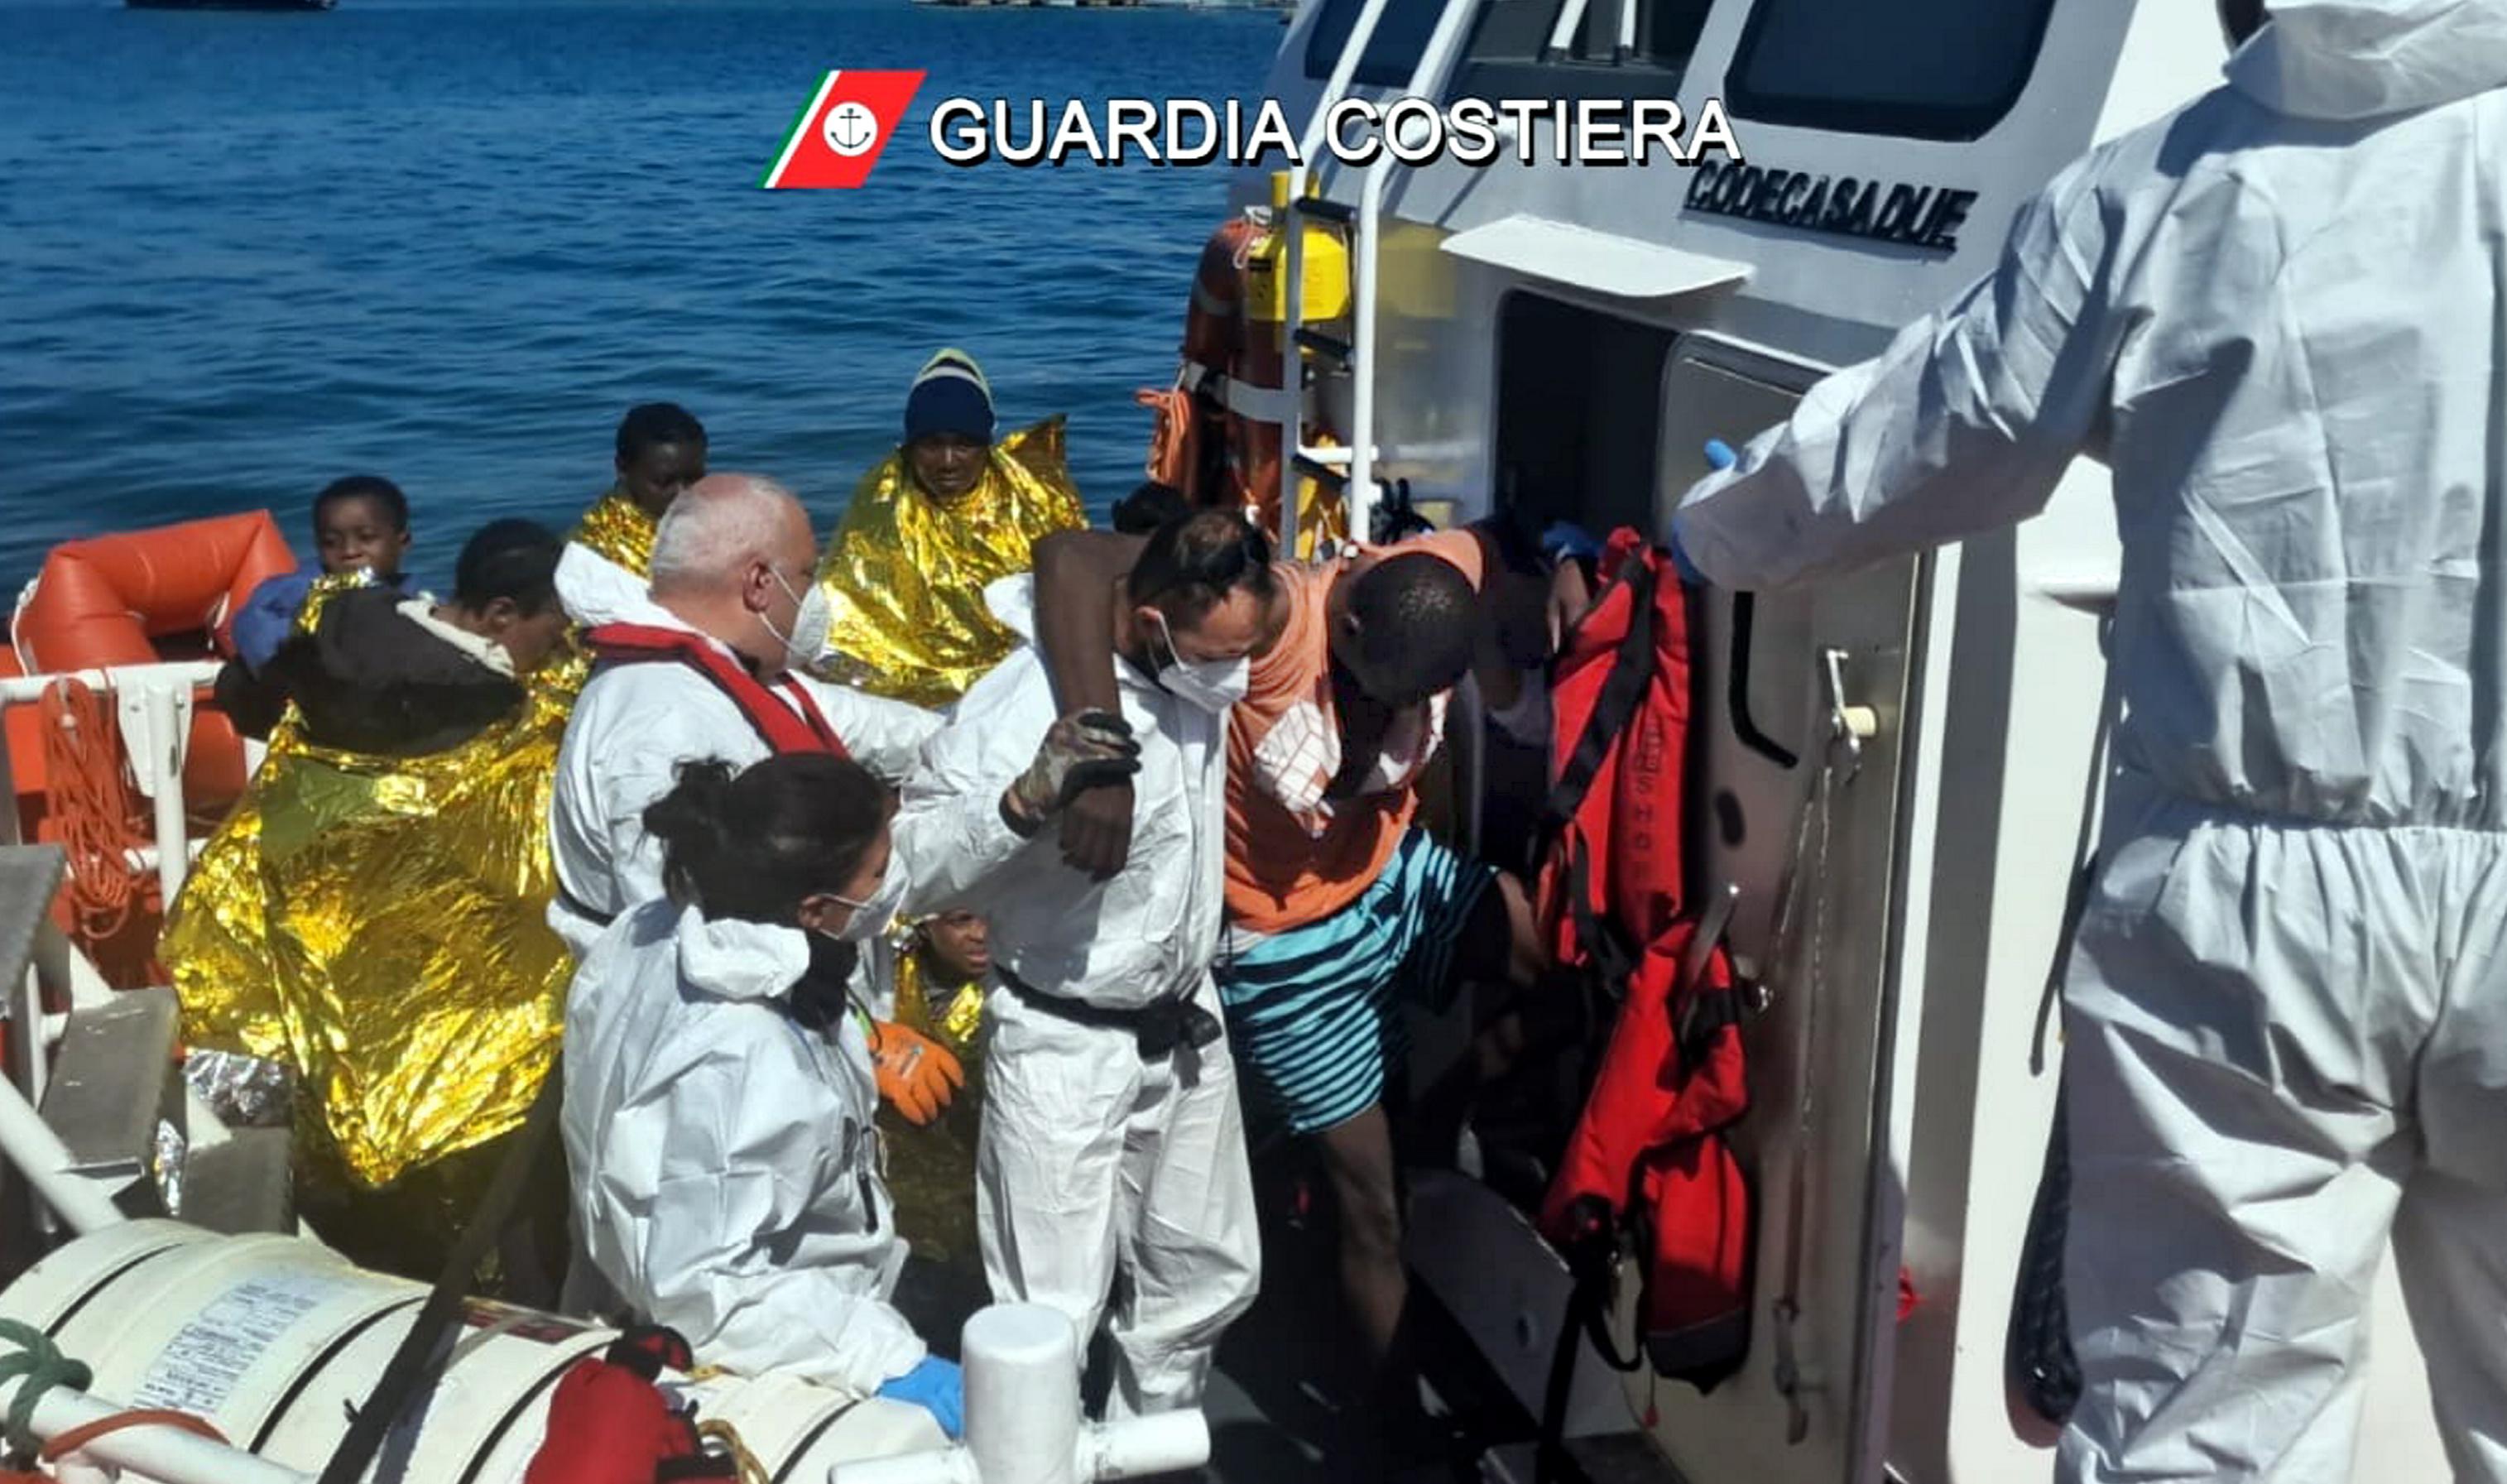 Photo of Migrants, Lampedusa under siege: more than 3,300 arrived in less than 72 hours